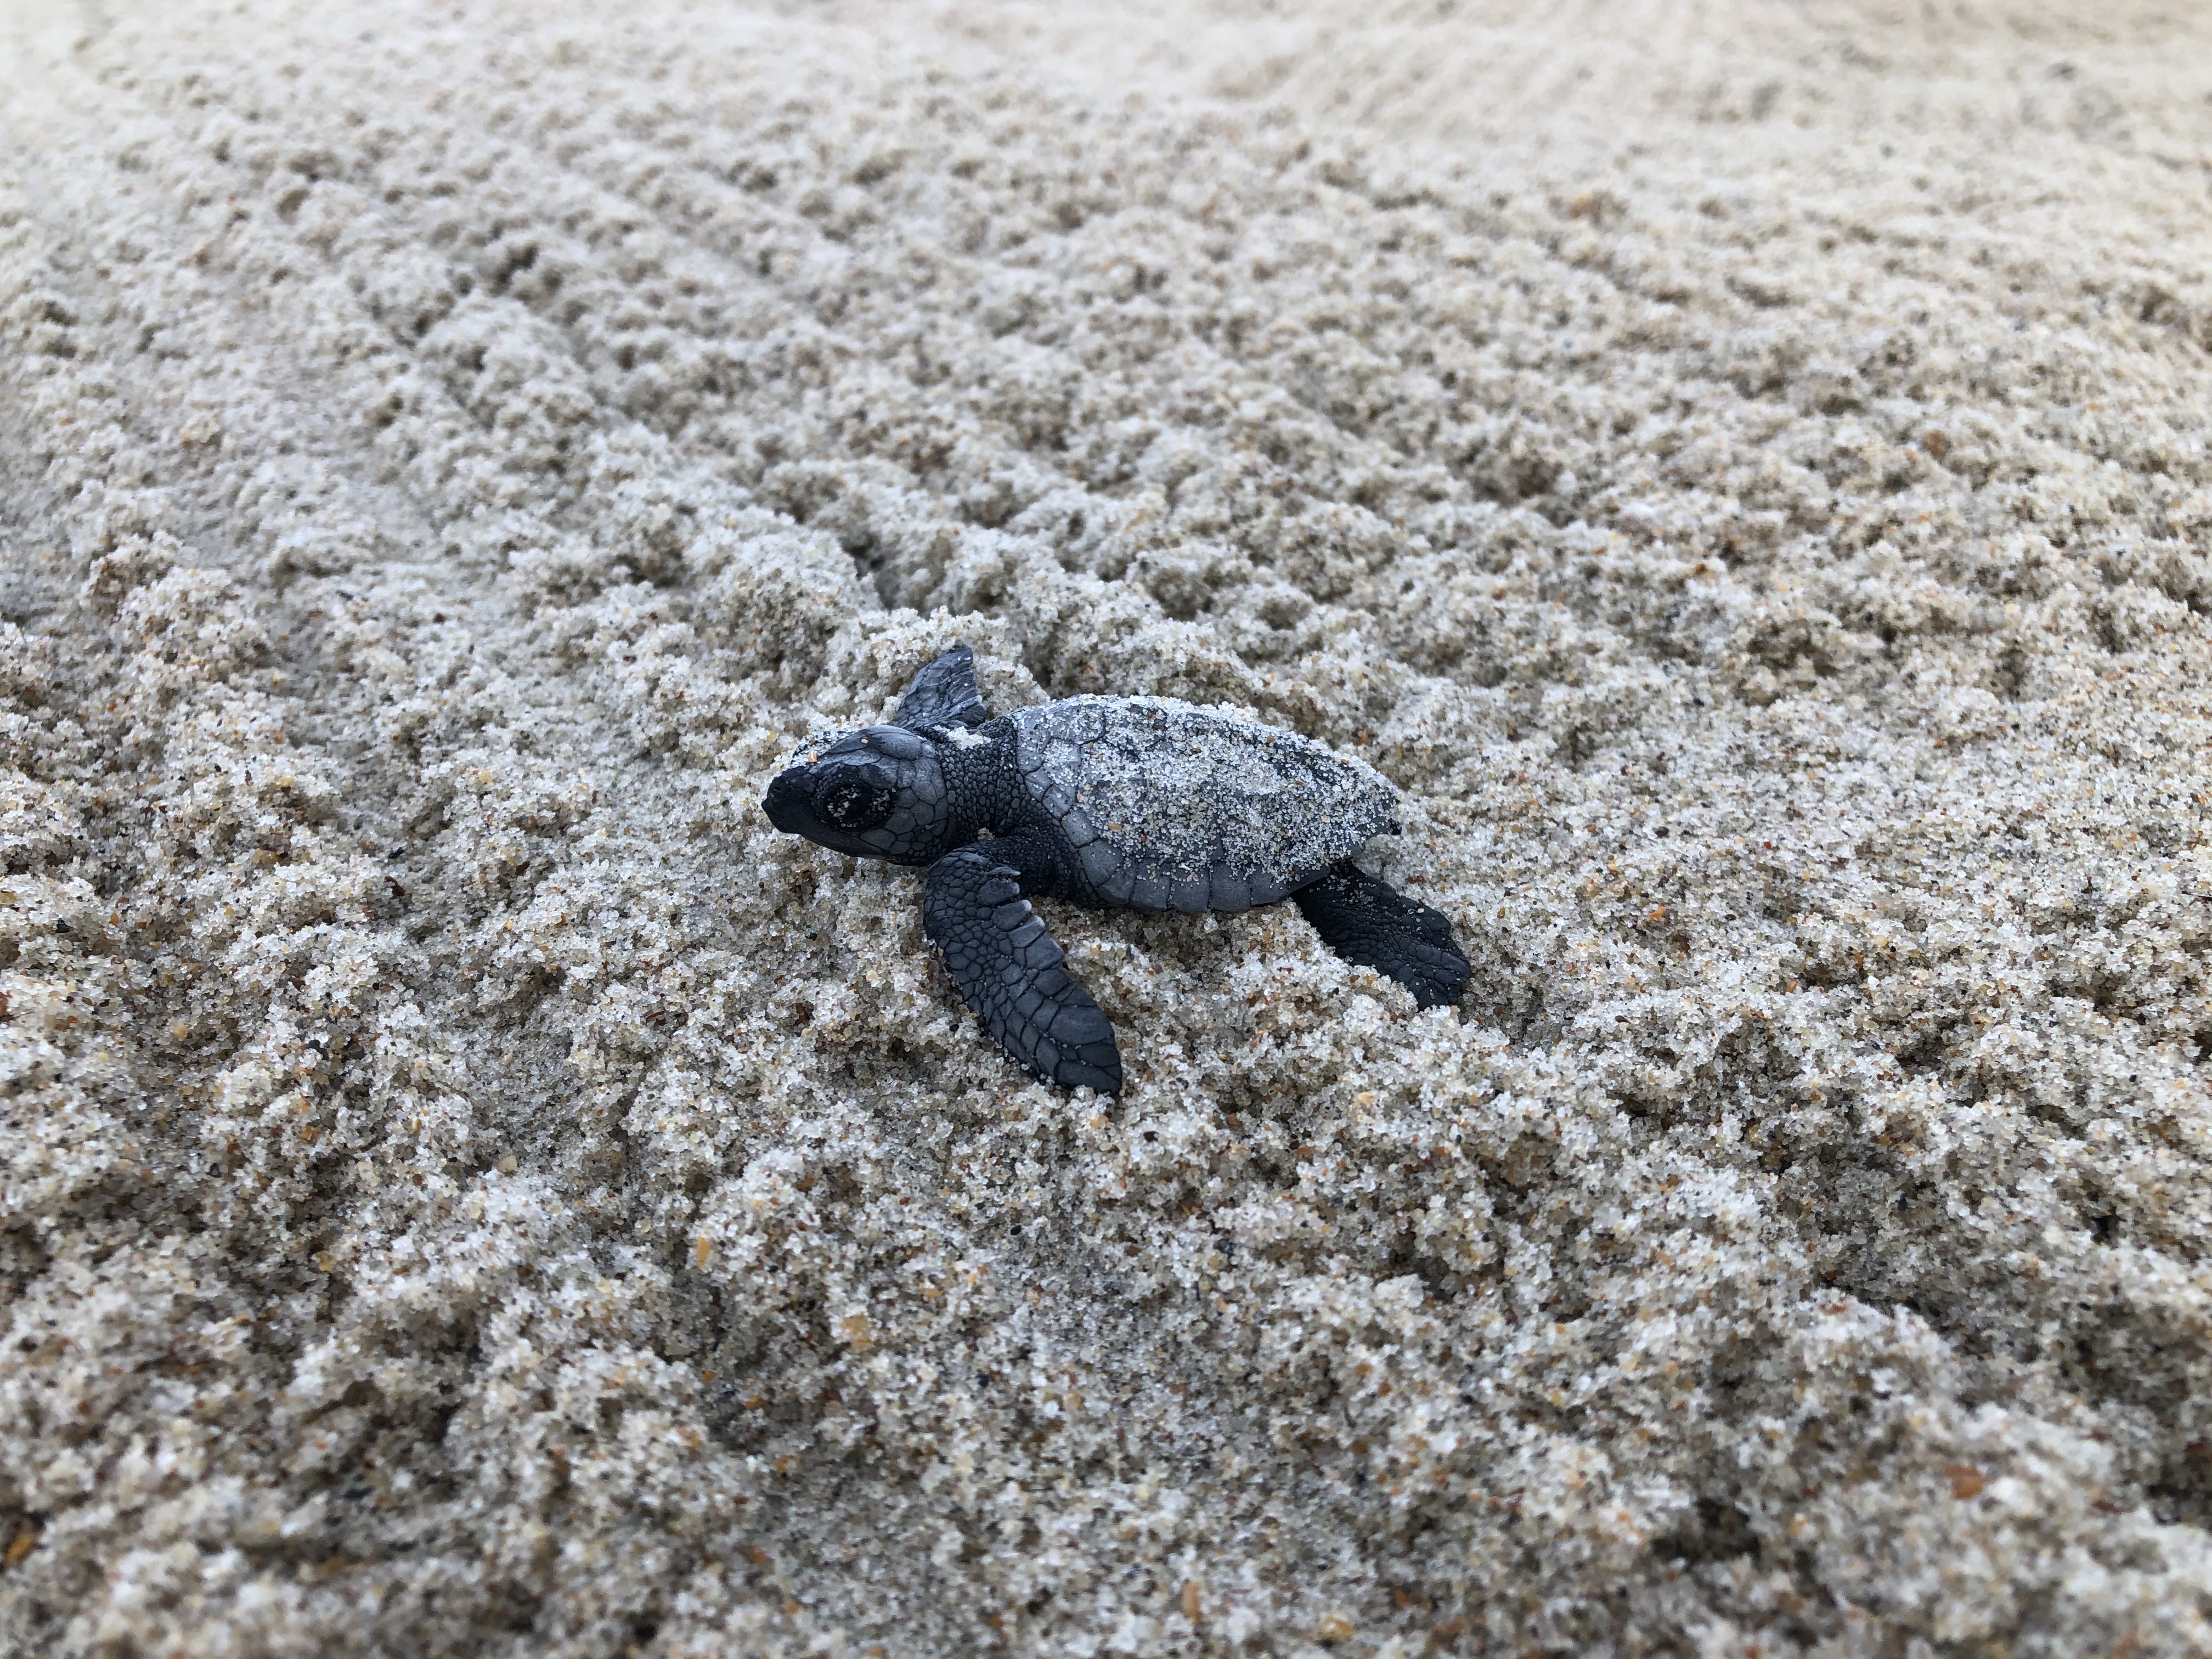 Kemp's Ridley sea turtle hatching on its way to the ocean.